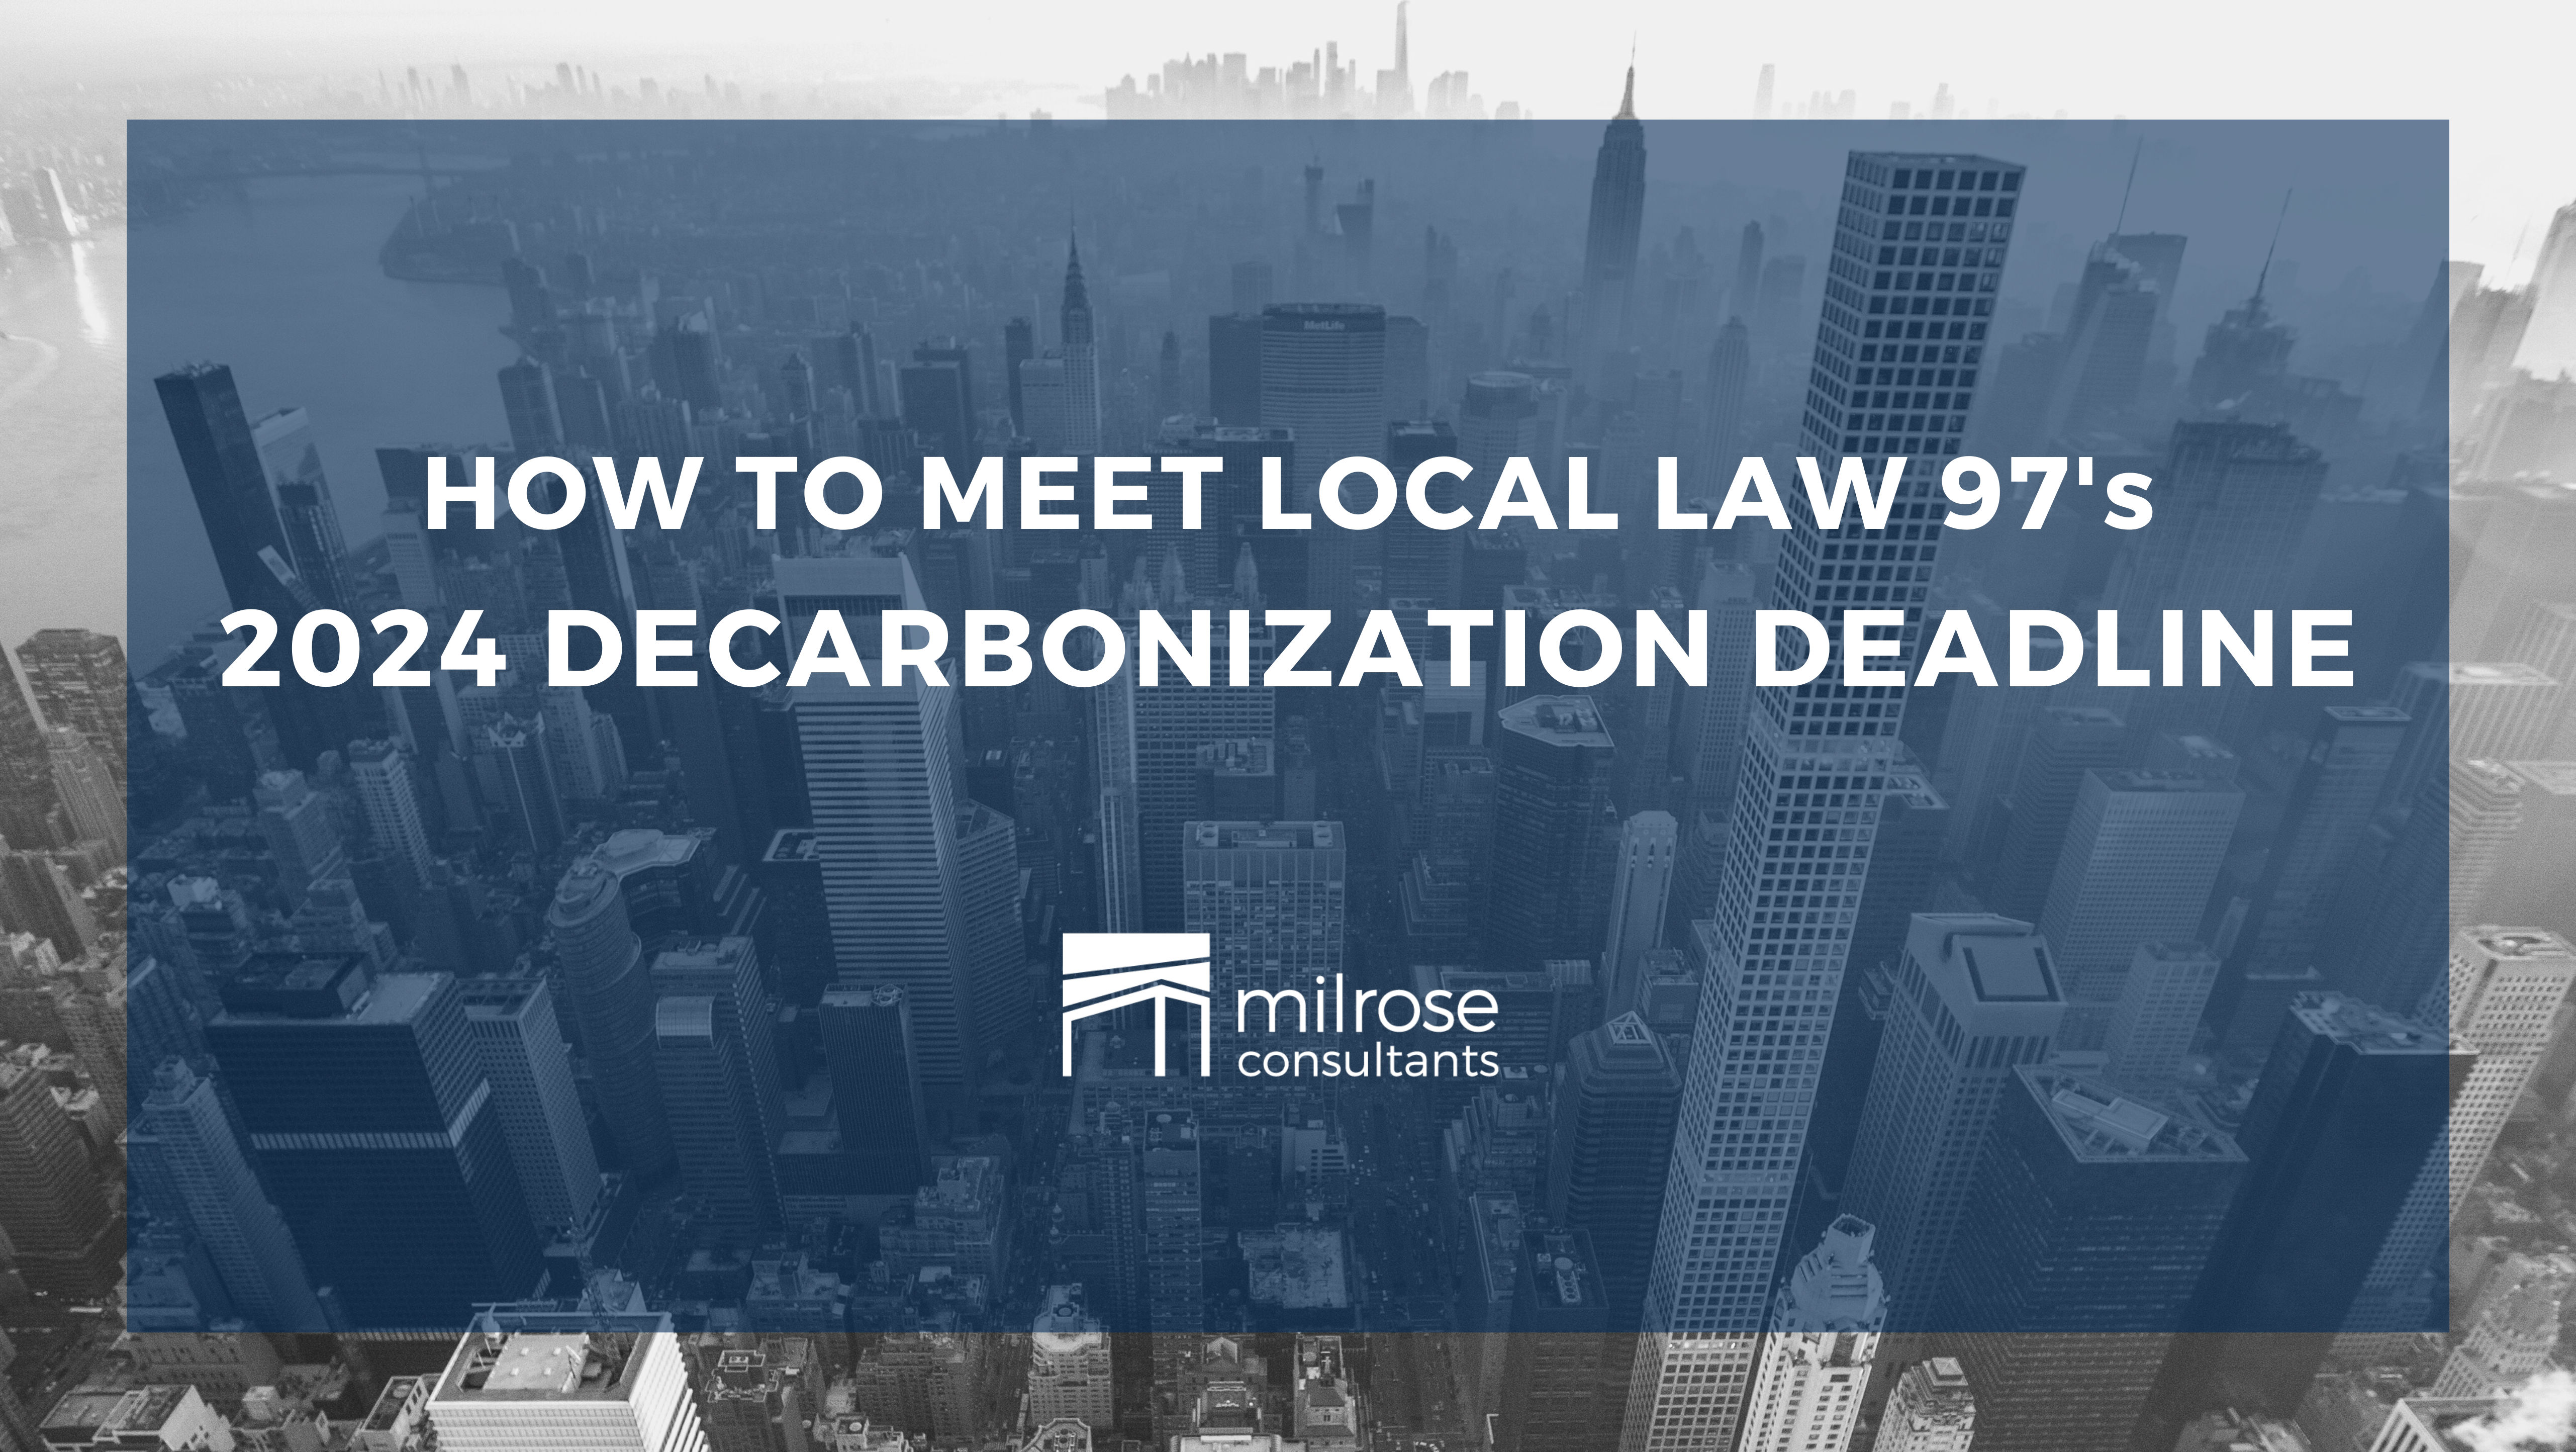 How to Meet Local Law 97's 2024 Decarbonization Deadline